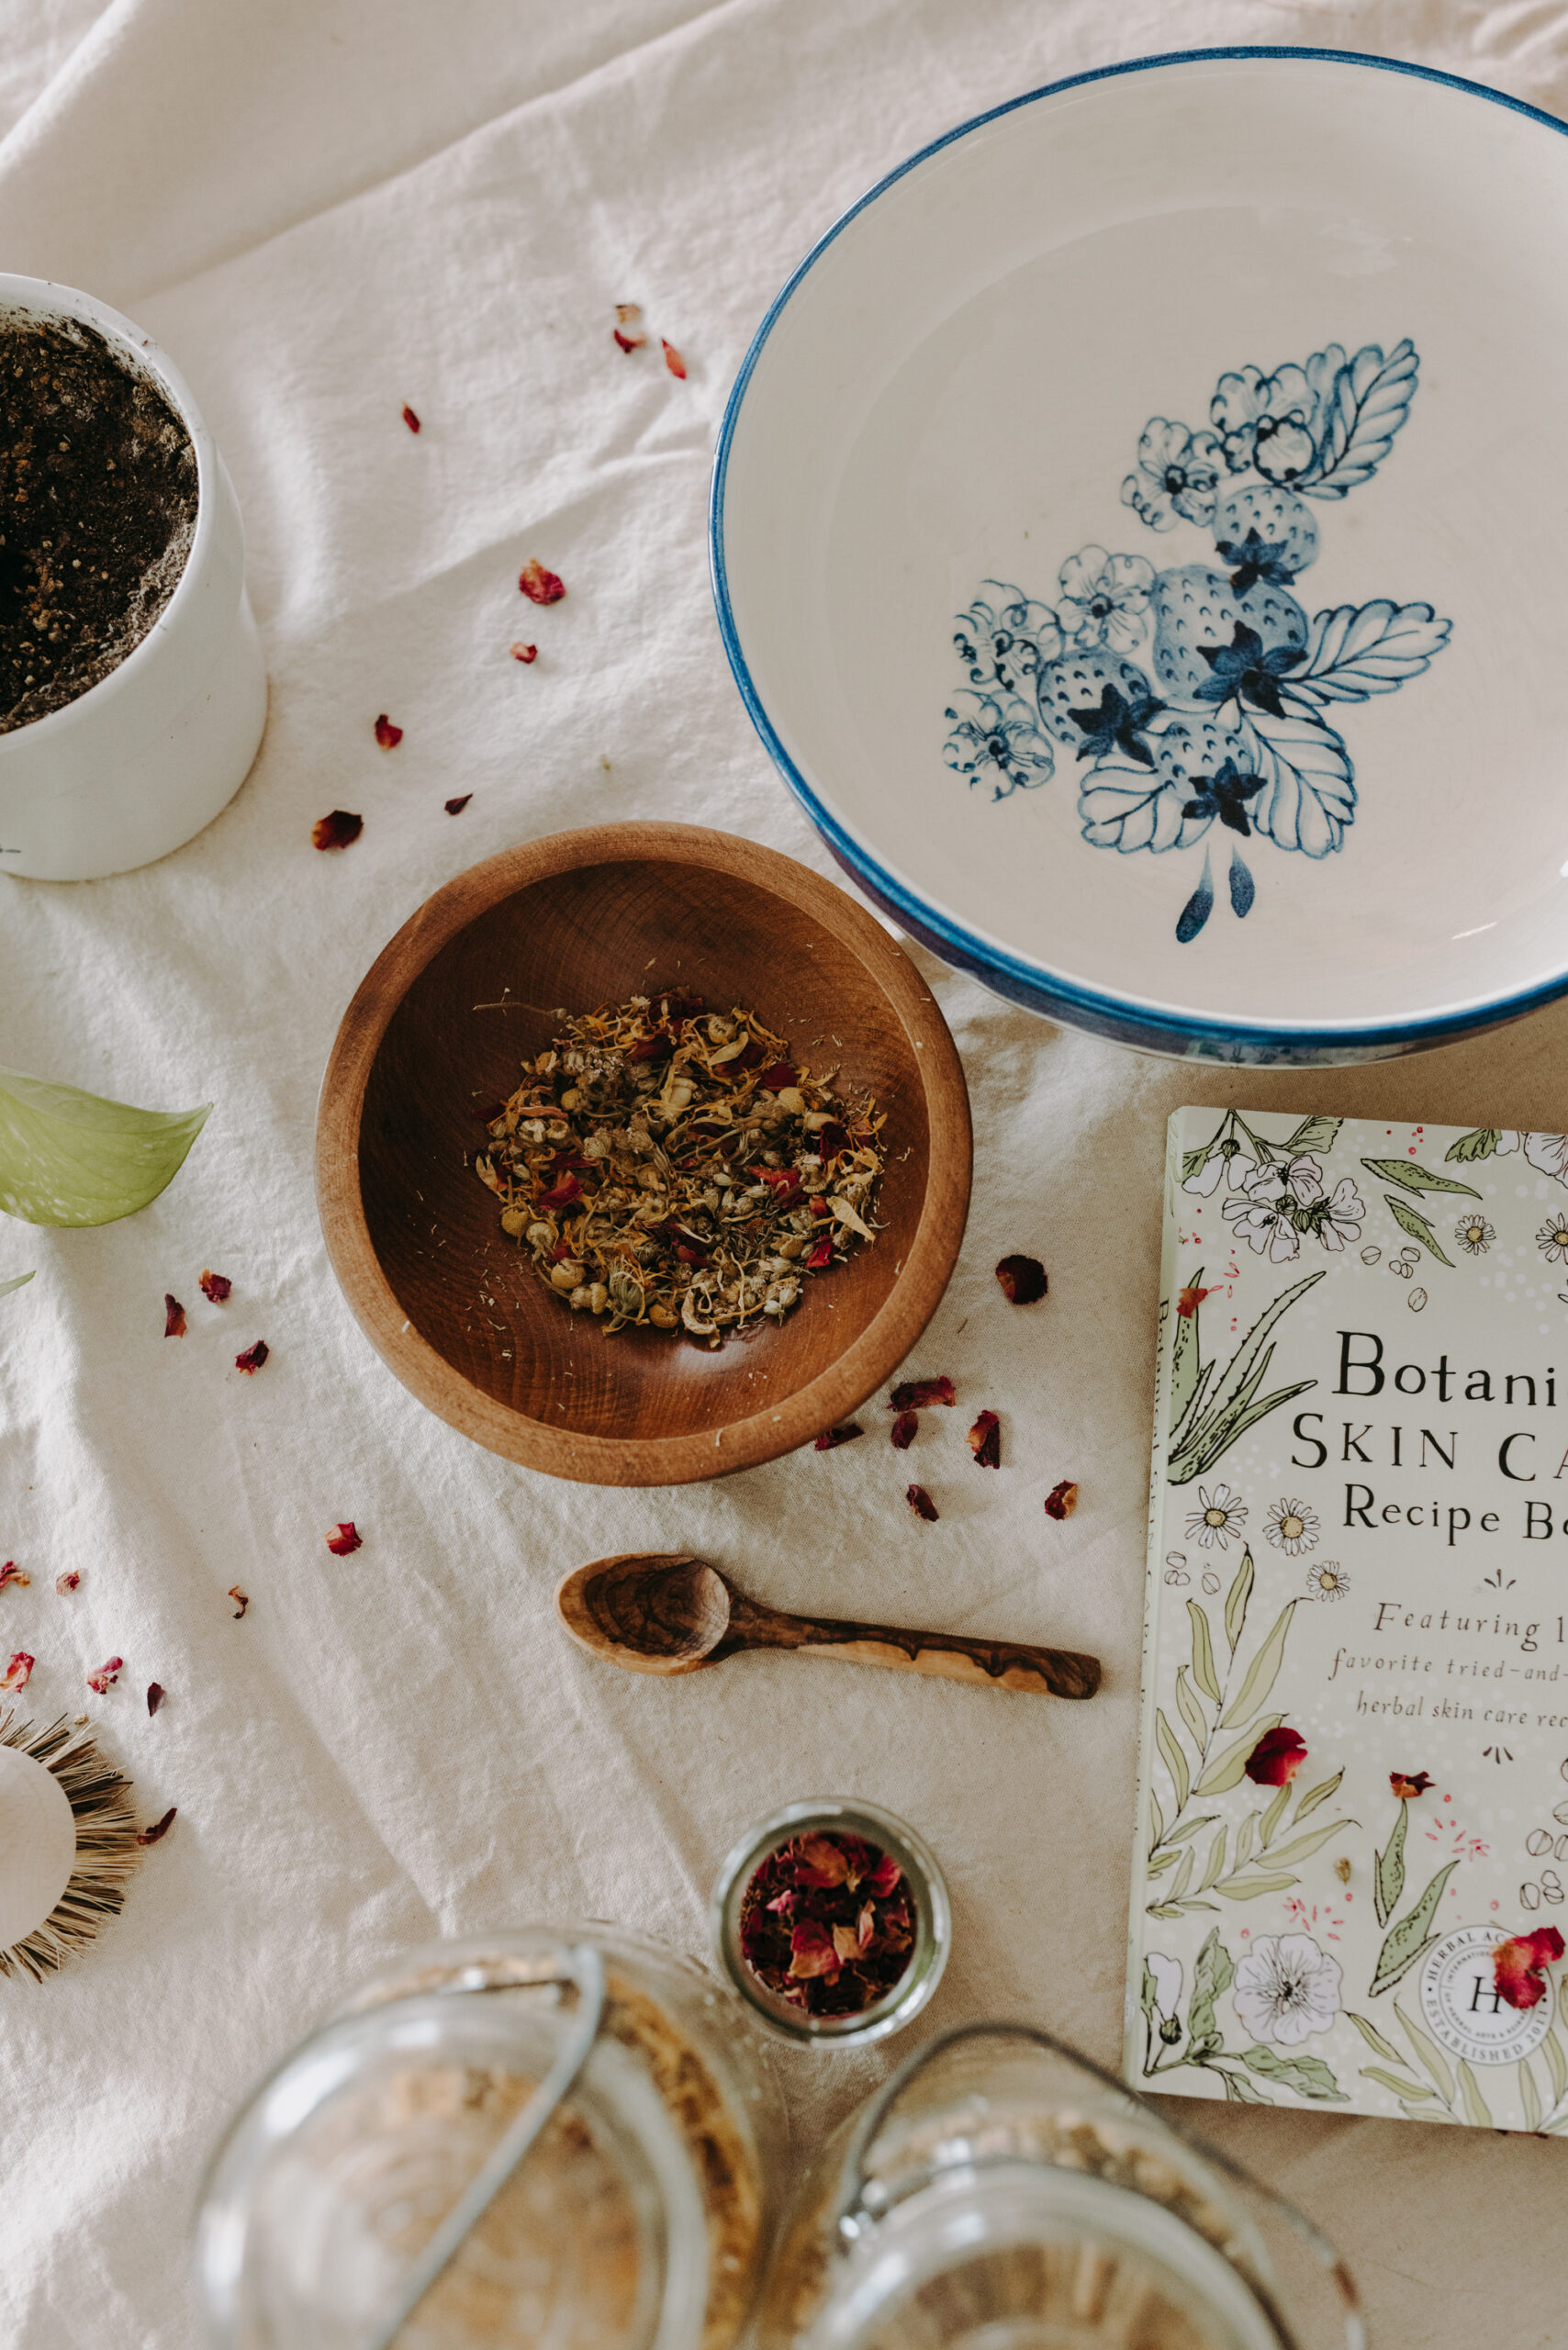 bowls of herbs and Botanical Skin Care Recipe book on a tablecloth